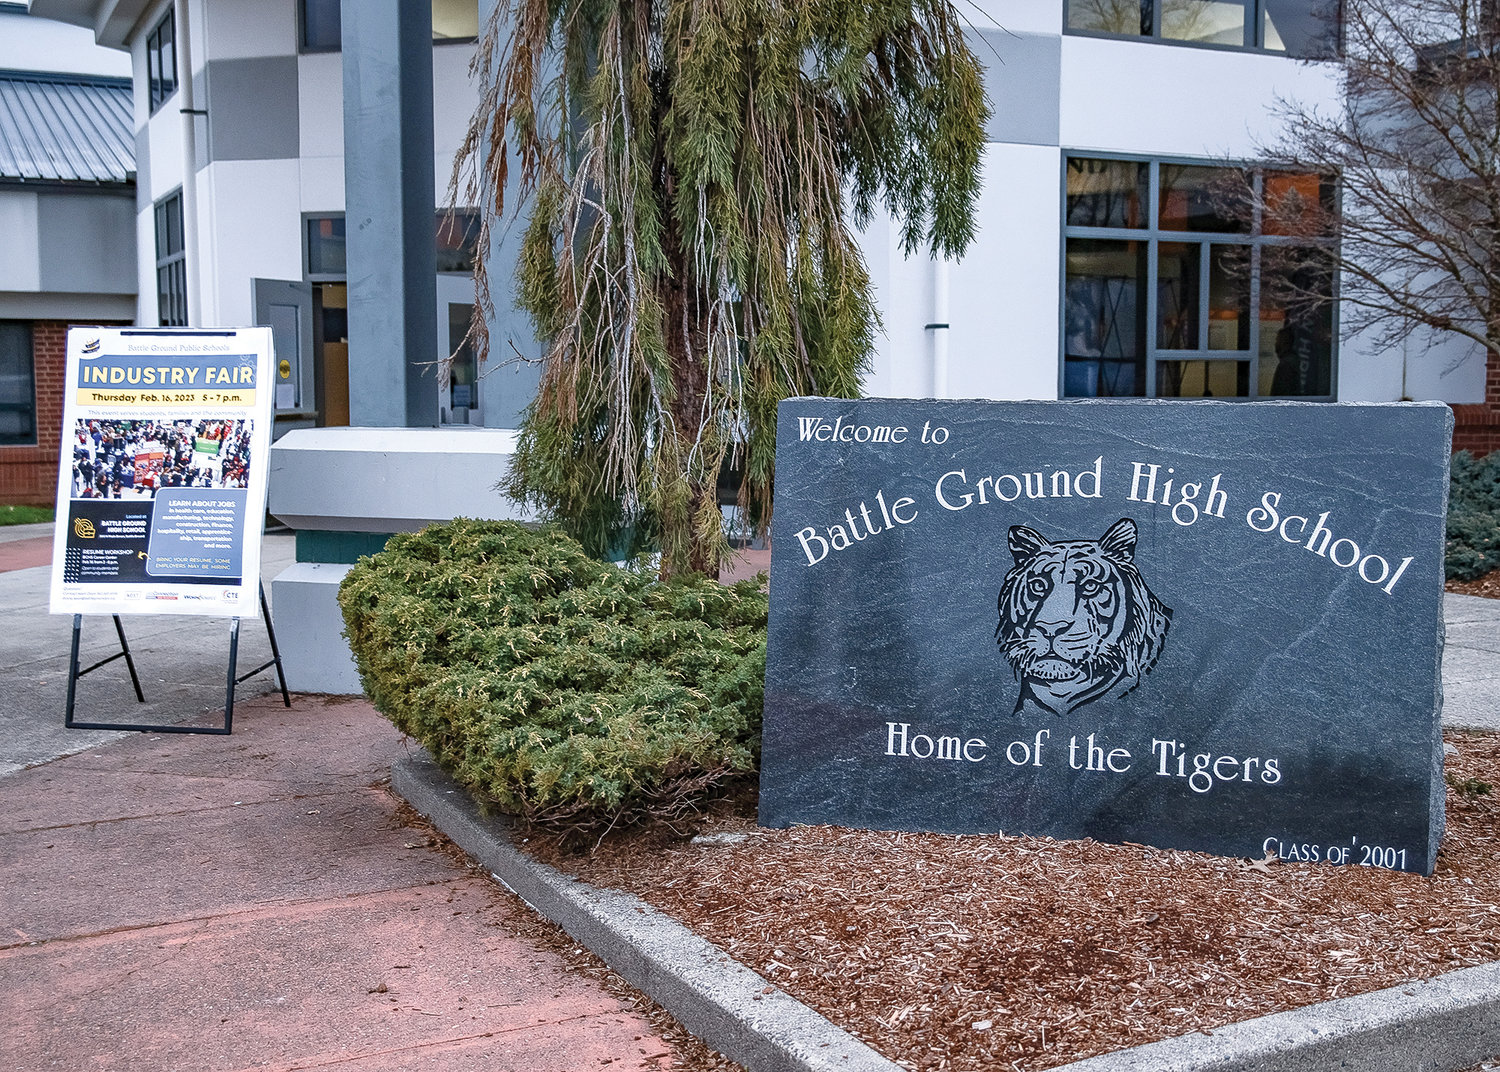 The main entrance of Battle Ground High School is pictured during the Industry Fair on Thursday, Feb. 16.